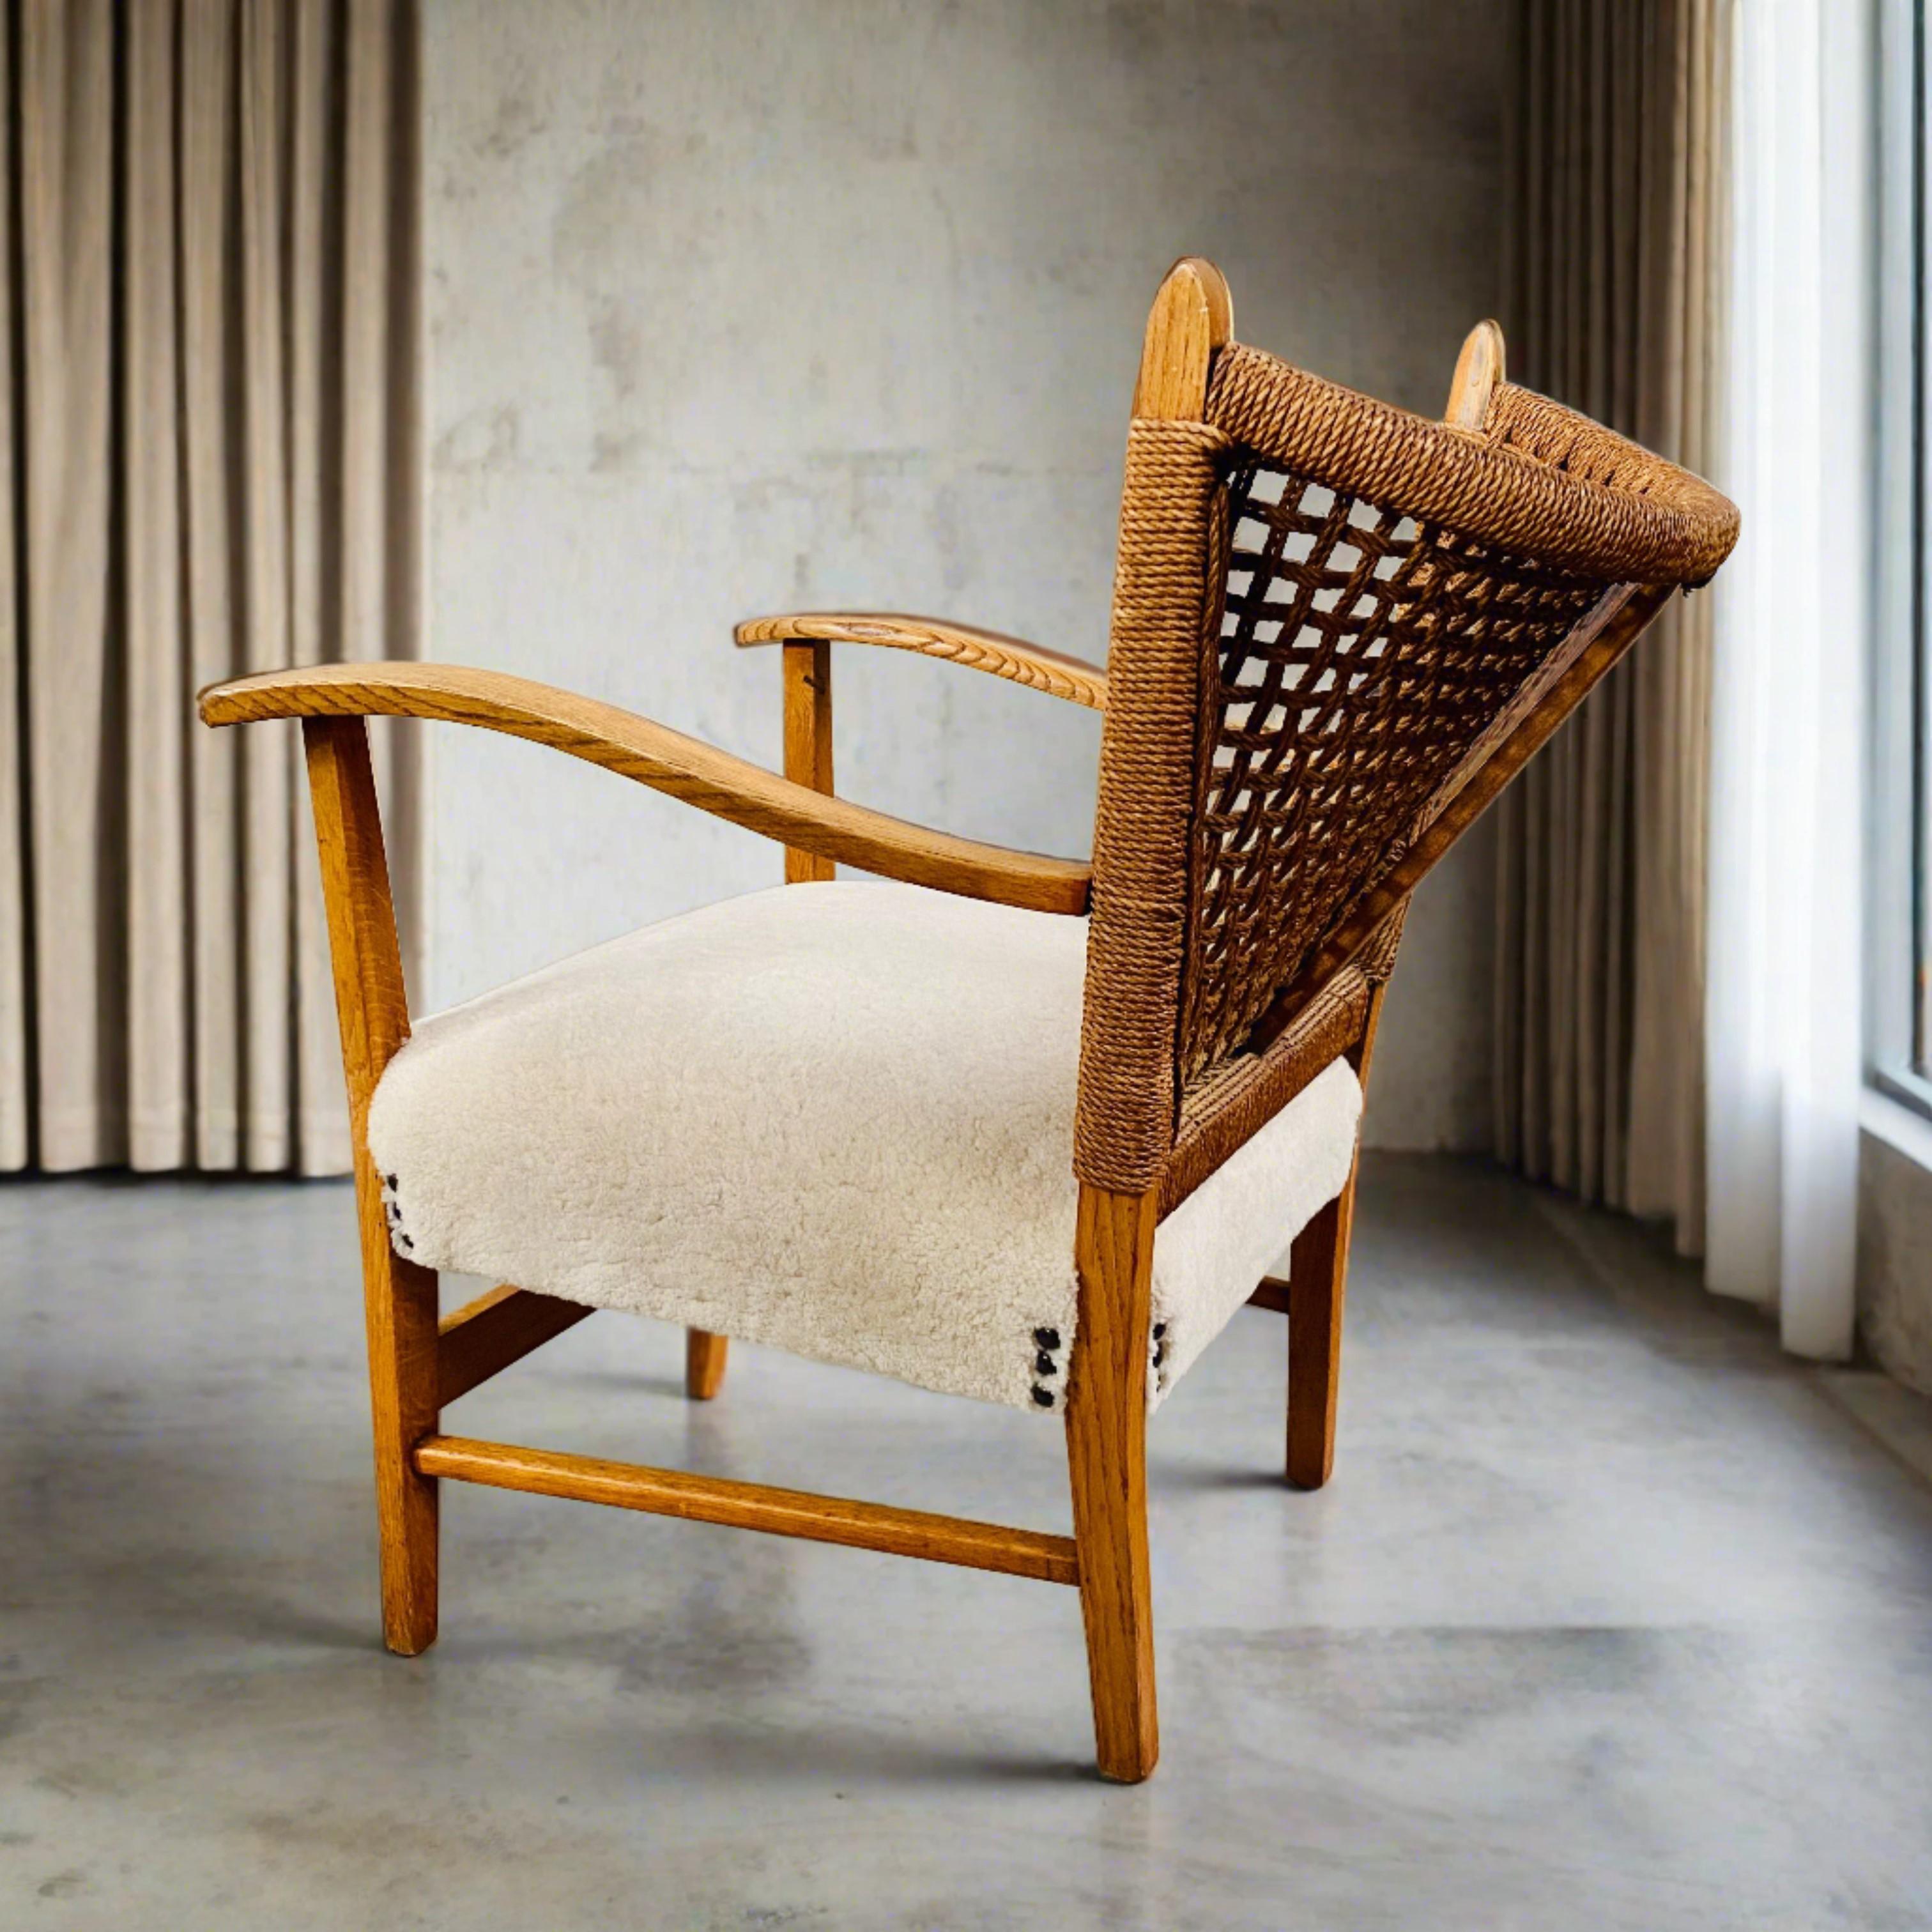 ROPE AND OAK ARM CHAIR BY BAS VAN PELT, NETHERLANDS 1940

Introducing the timeless elegance of the Bas van Pelt oak and cord armchair, a vintage gem hailing from the Netherlands circa 1940s. Crafted with meticulous attention to detail, this chair